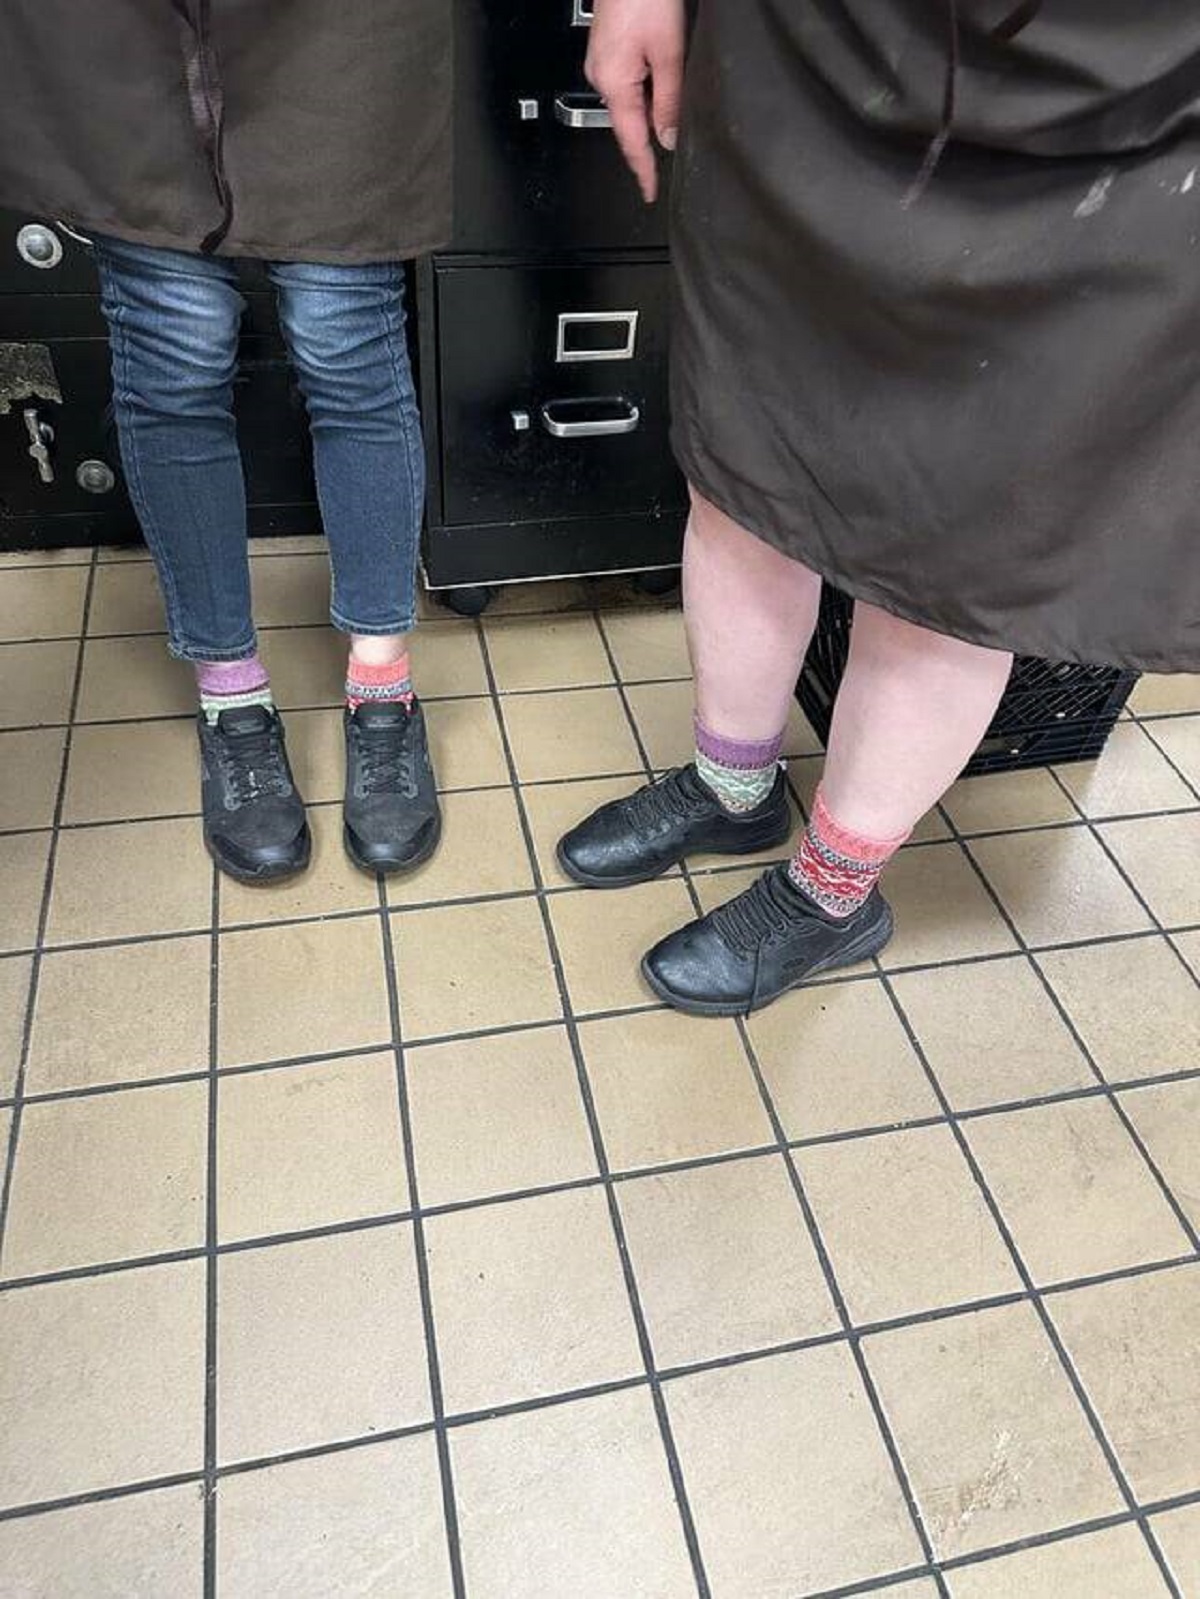 "My coworkers wore the same mismatched socks"